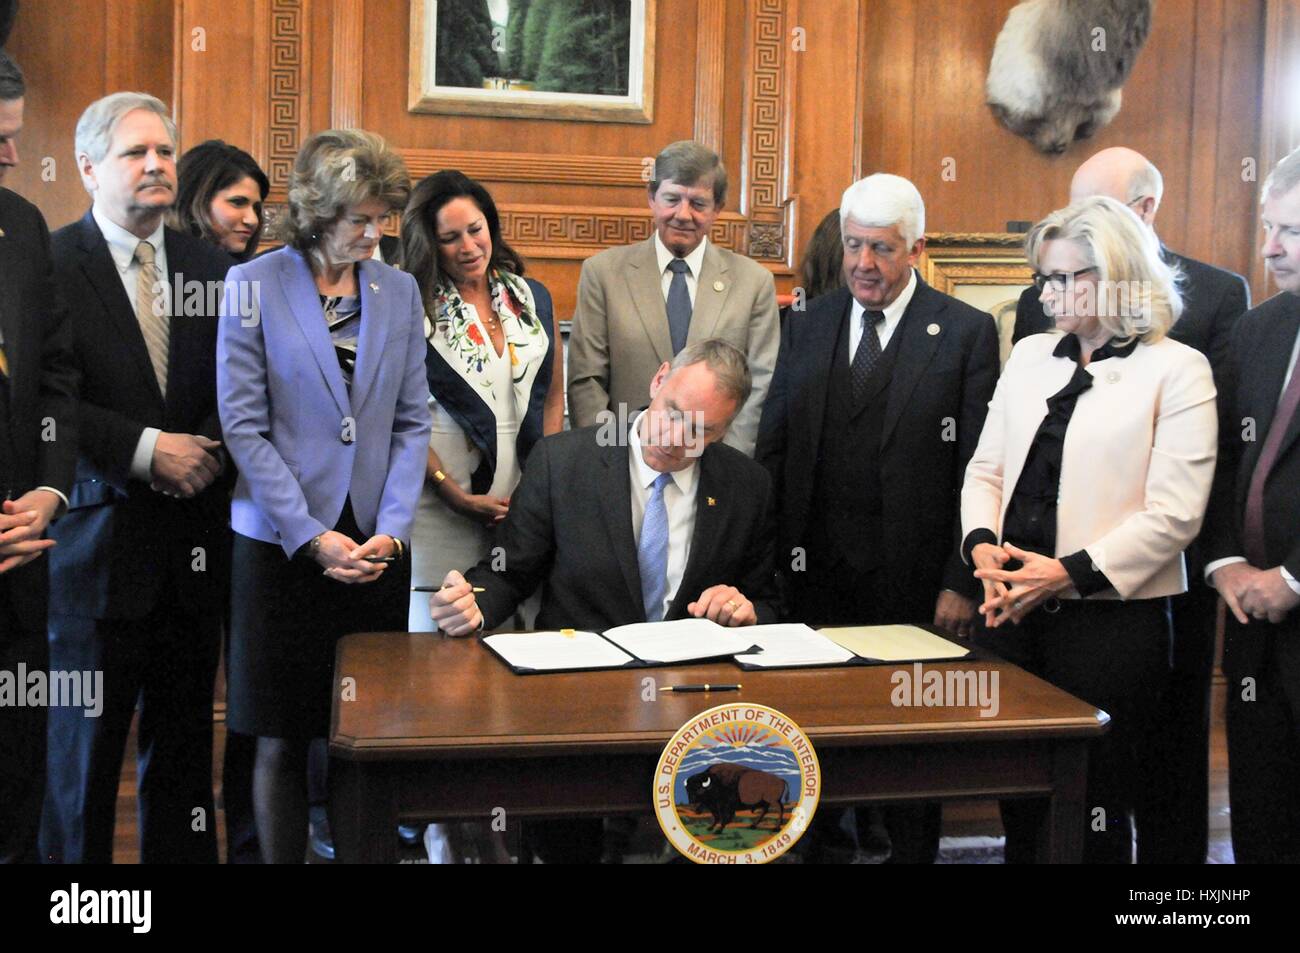 Washington, USA. 29th March 2017. U.S. Interior Secretary Ryan Zinke, accompanied by Republican members of Congress, signs an order lifting a moratorium on new coal leases on federal lands during a ceremony at the Interior Department March 29, 2017 in Washington. Credit: Planetpix/Alamy Live News Stock Photo